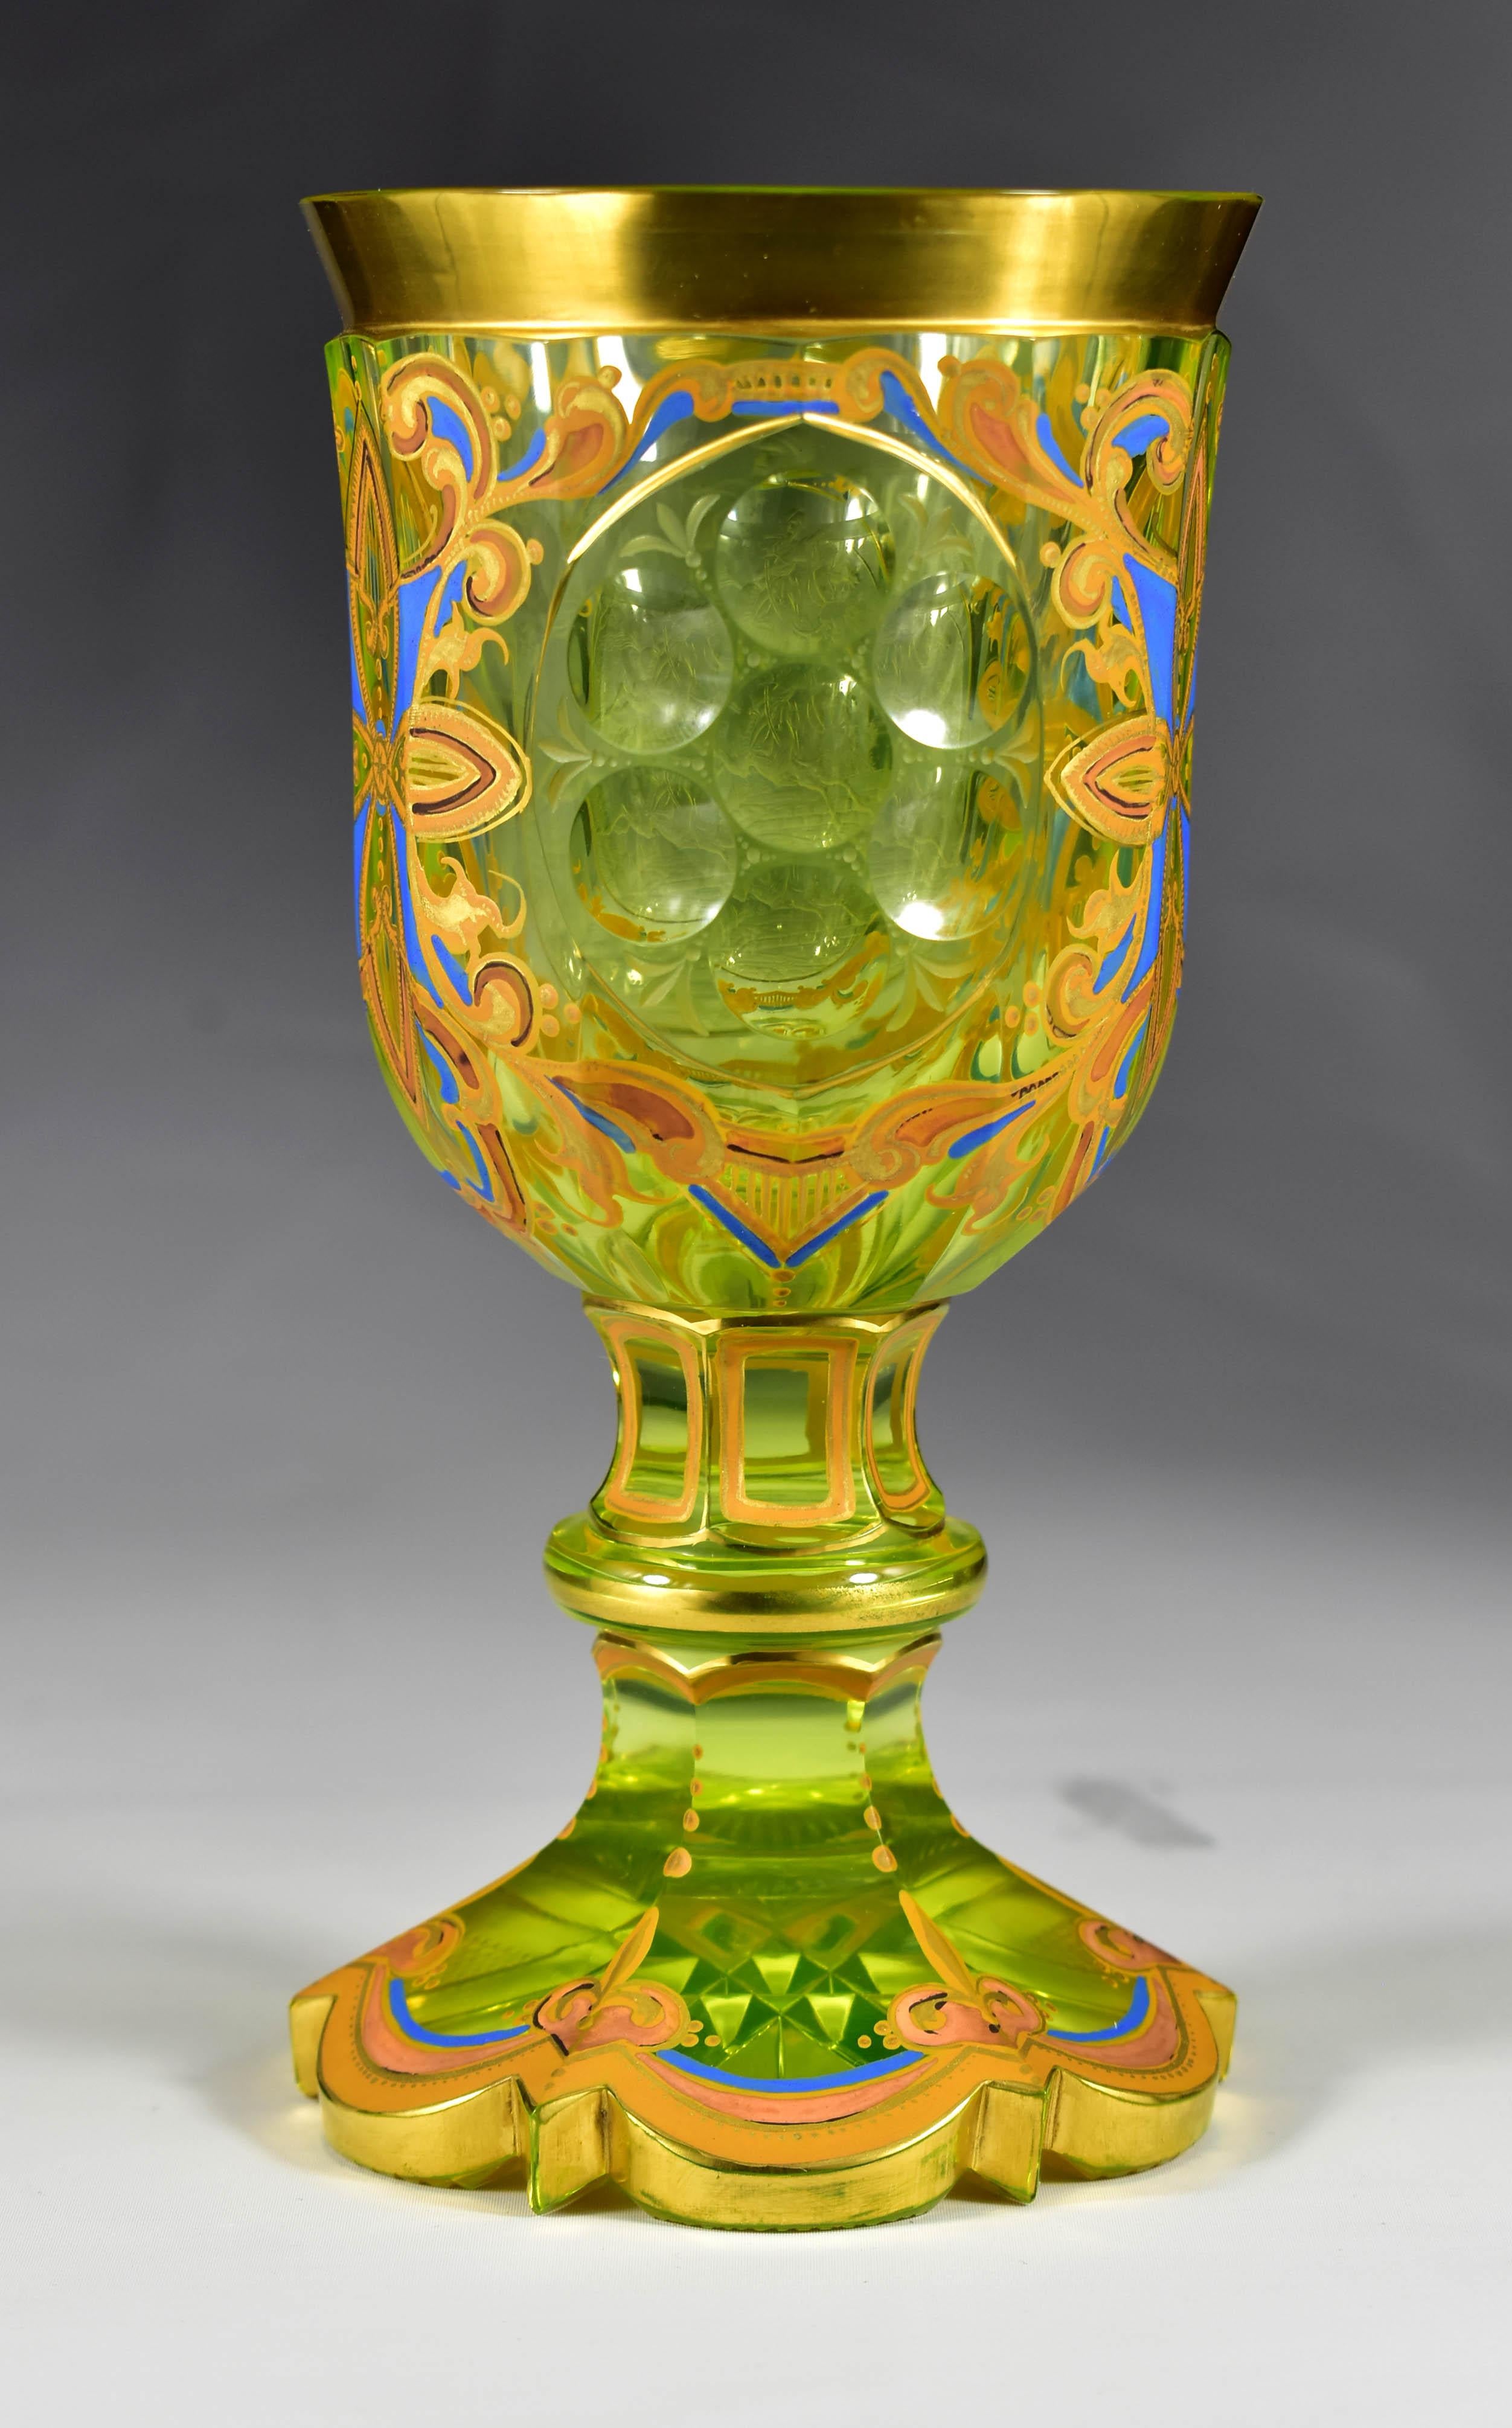 Hand-Crafted Engraved Painted Goblet -  Uranium glass - Bohemian glass 19-20 centuries